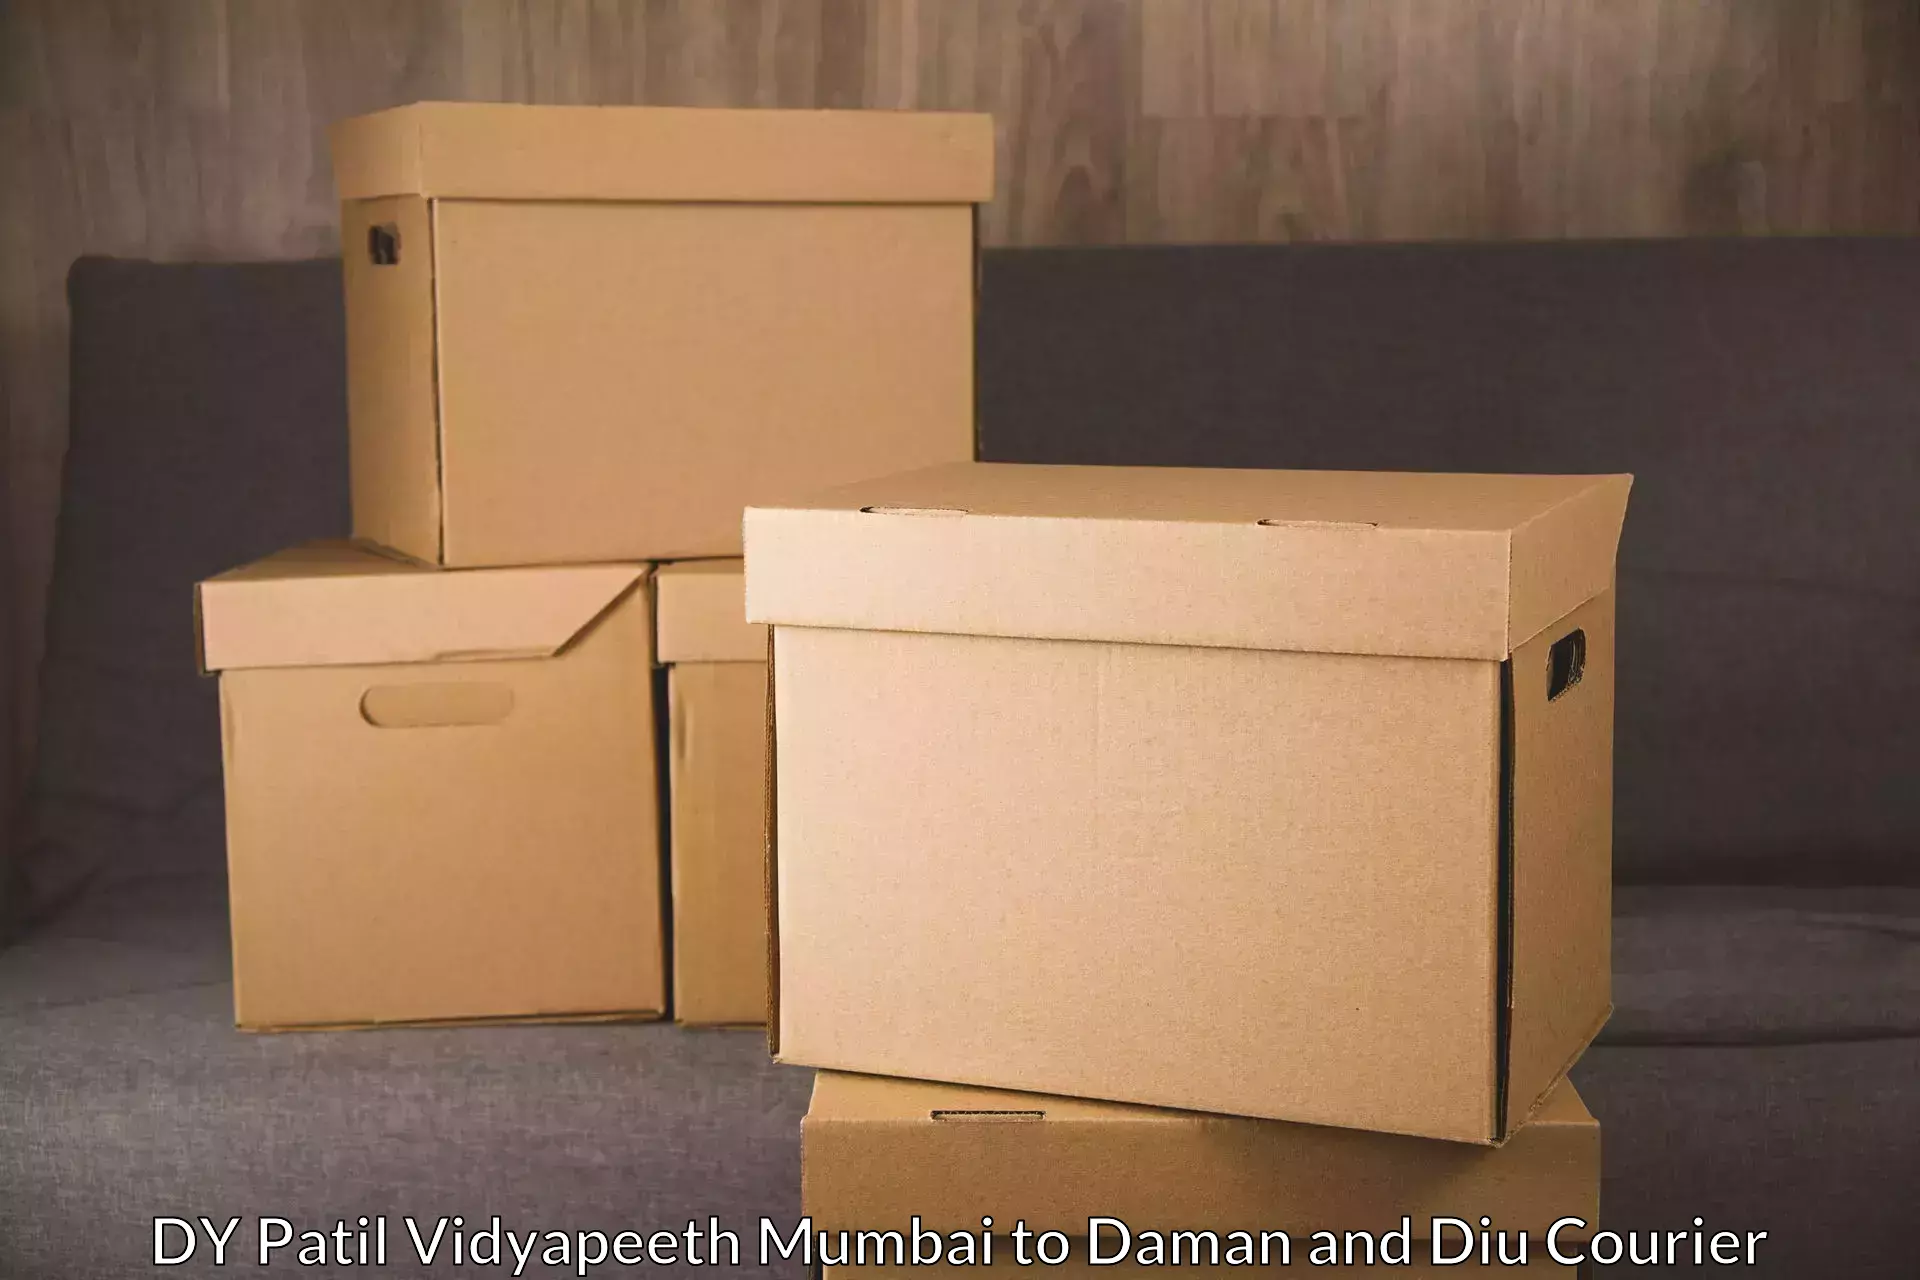 High-quality delivery services DY Patil Vidyapeeth Mumbai to Daman and Diu